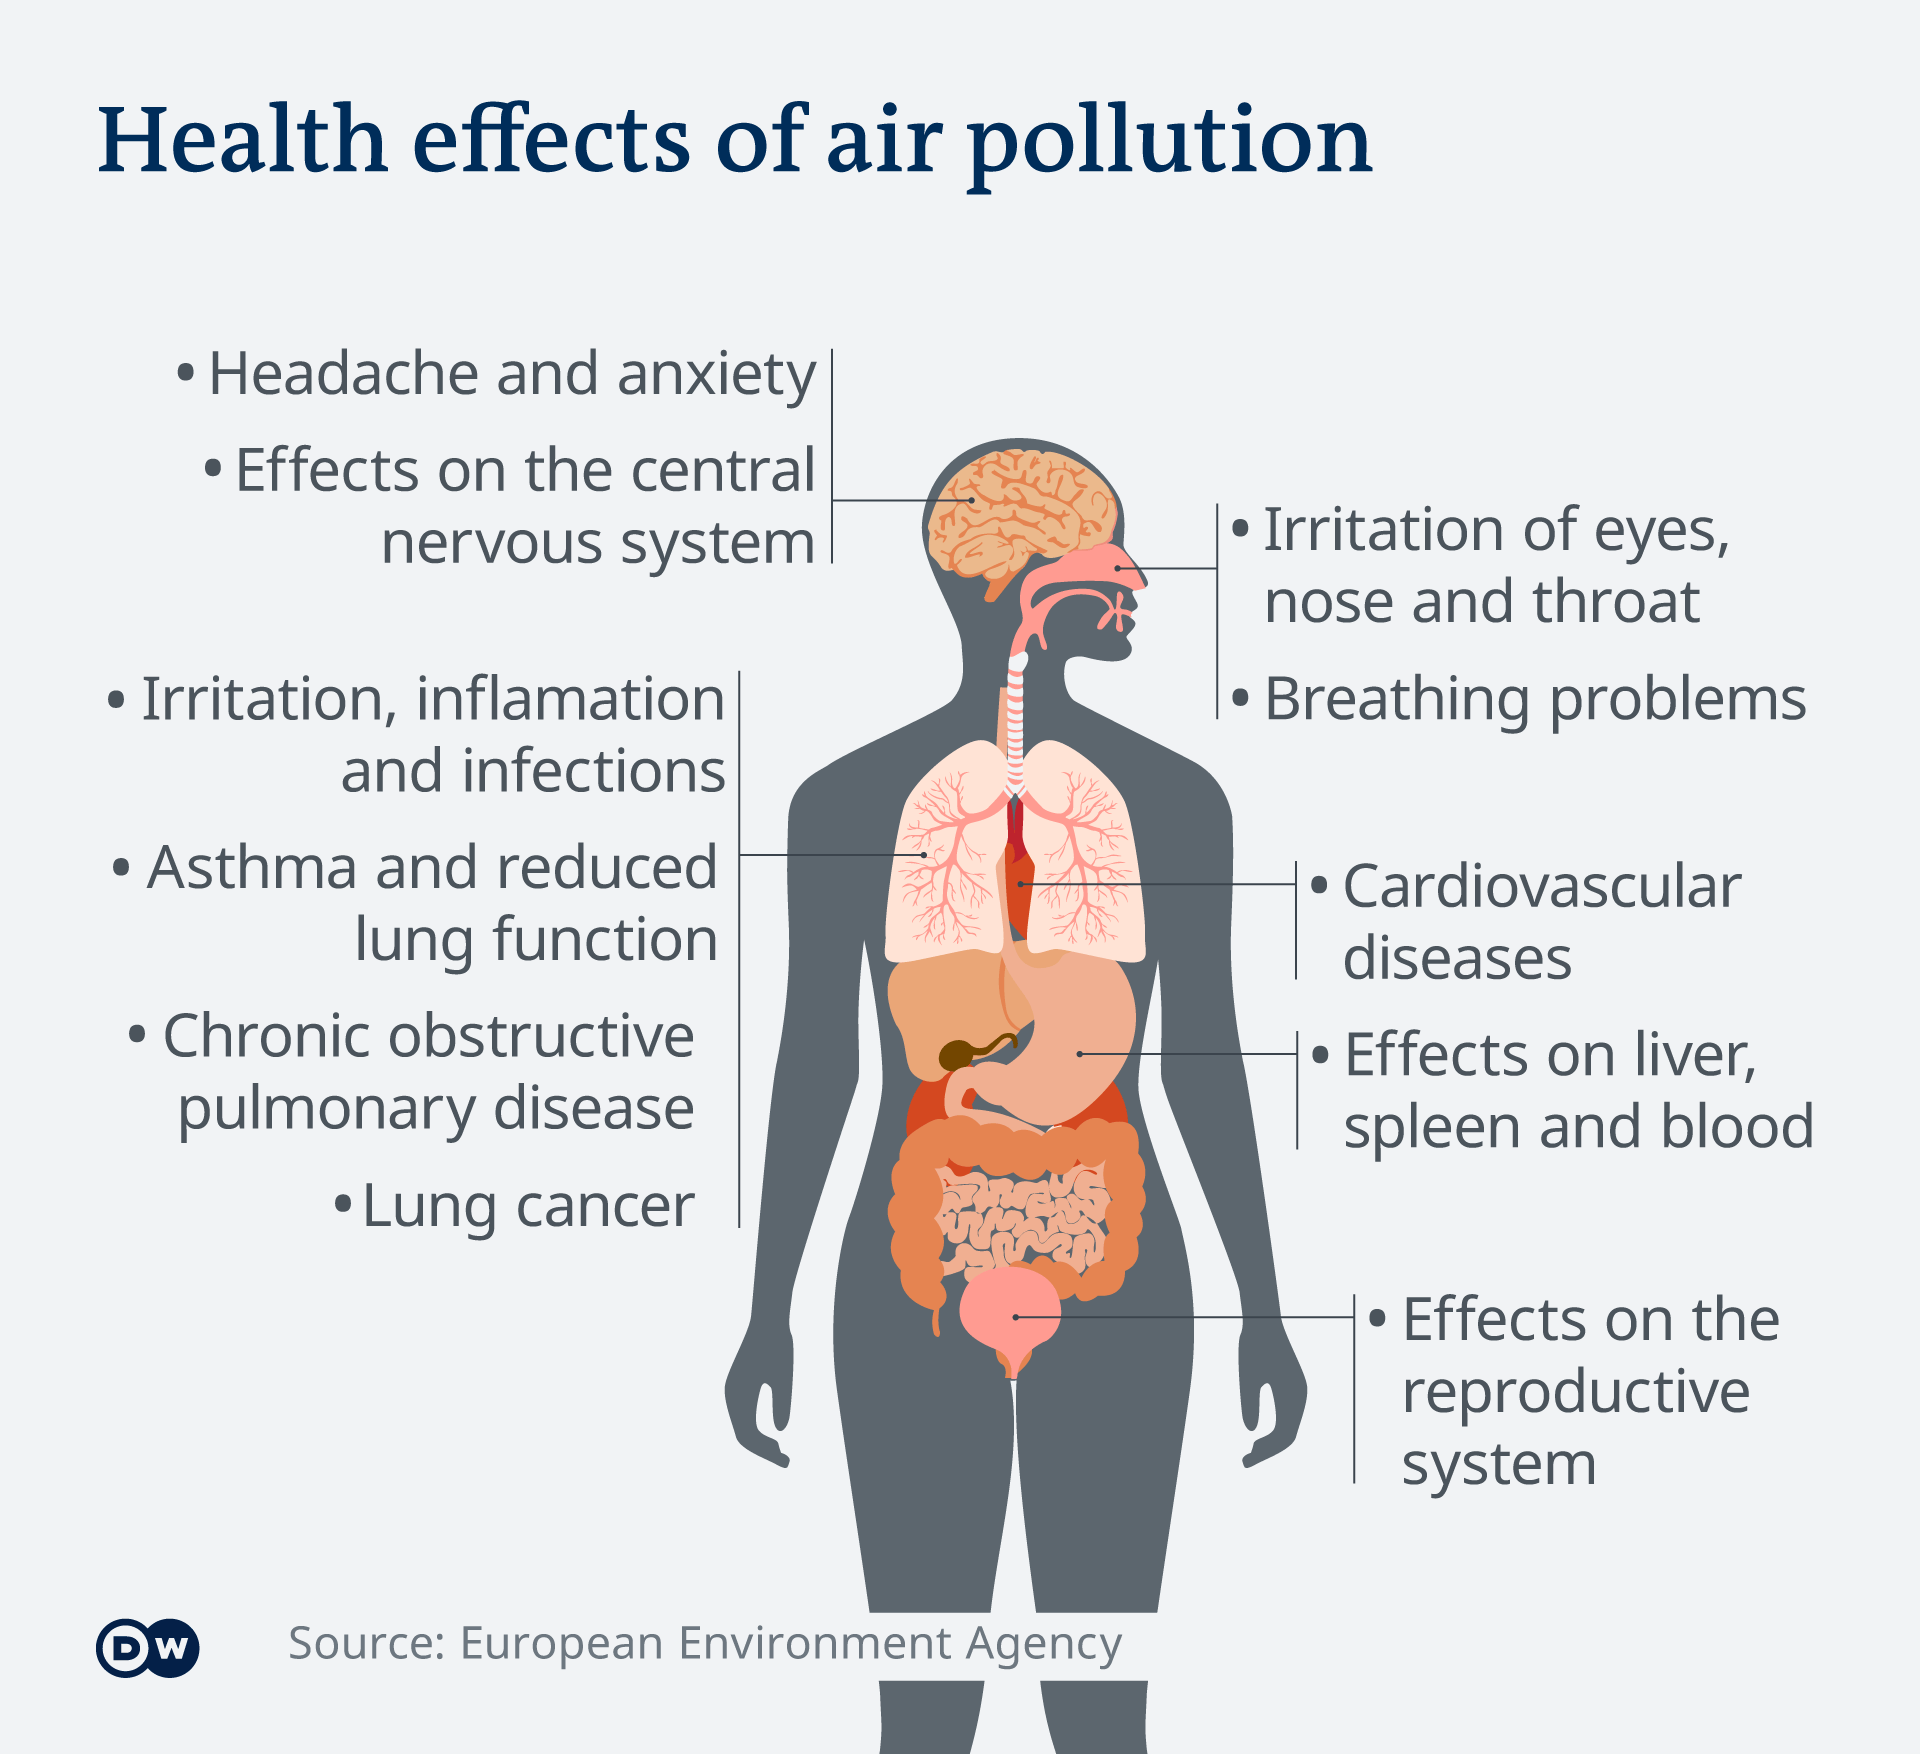 Graphic showing the health effects of air pollution on humans